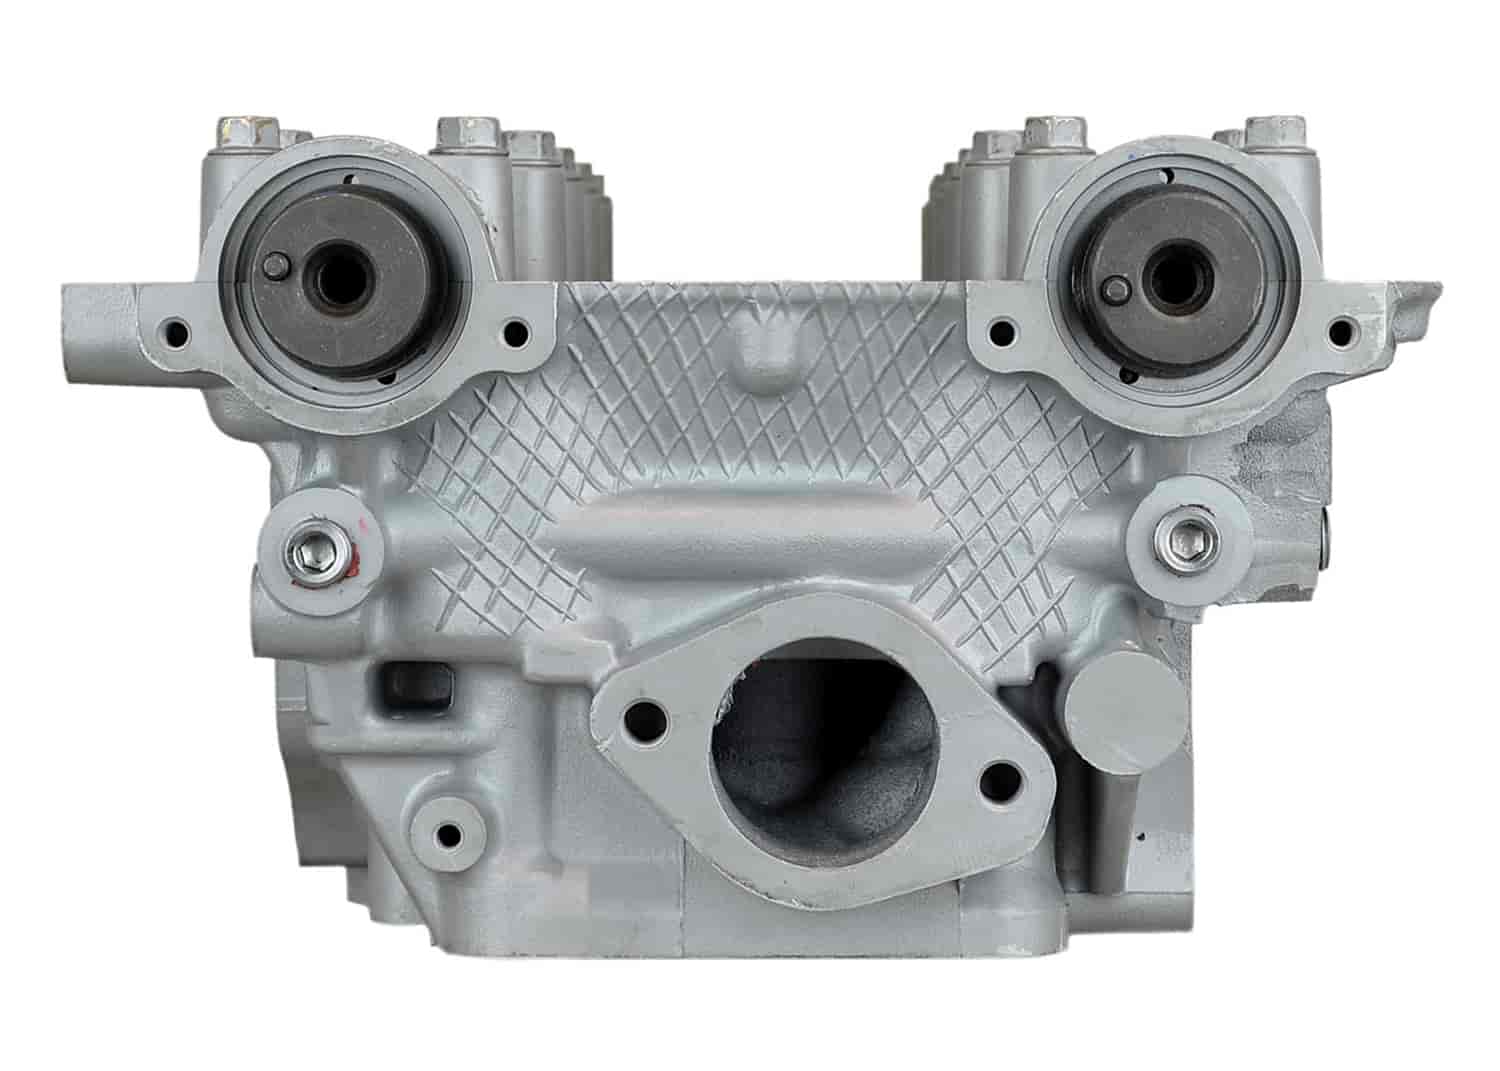 Remanufactured Cylinder Head for 1995-2002 Kia Sportage with 2.0L L4